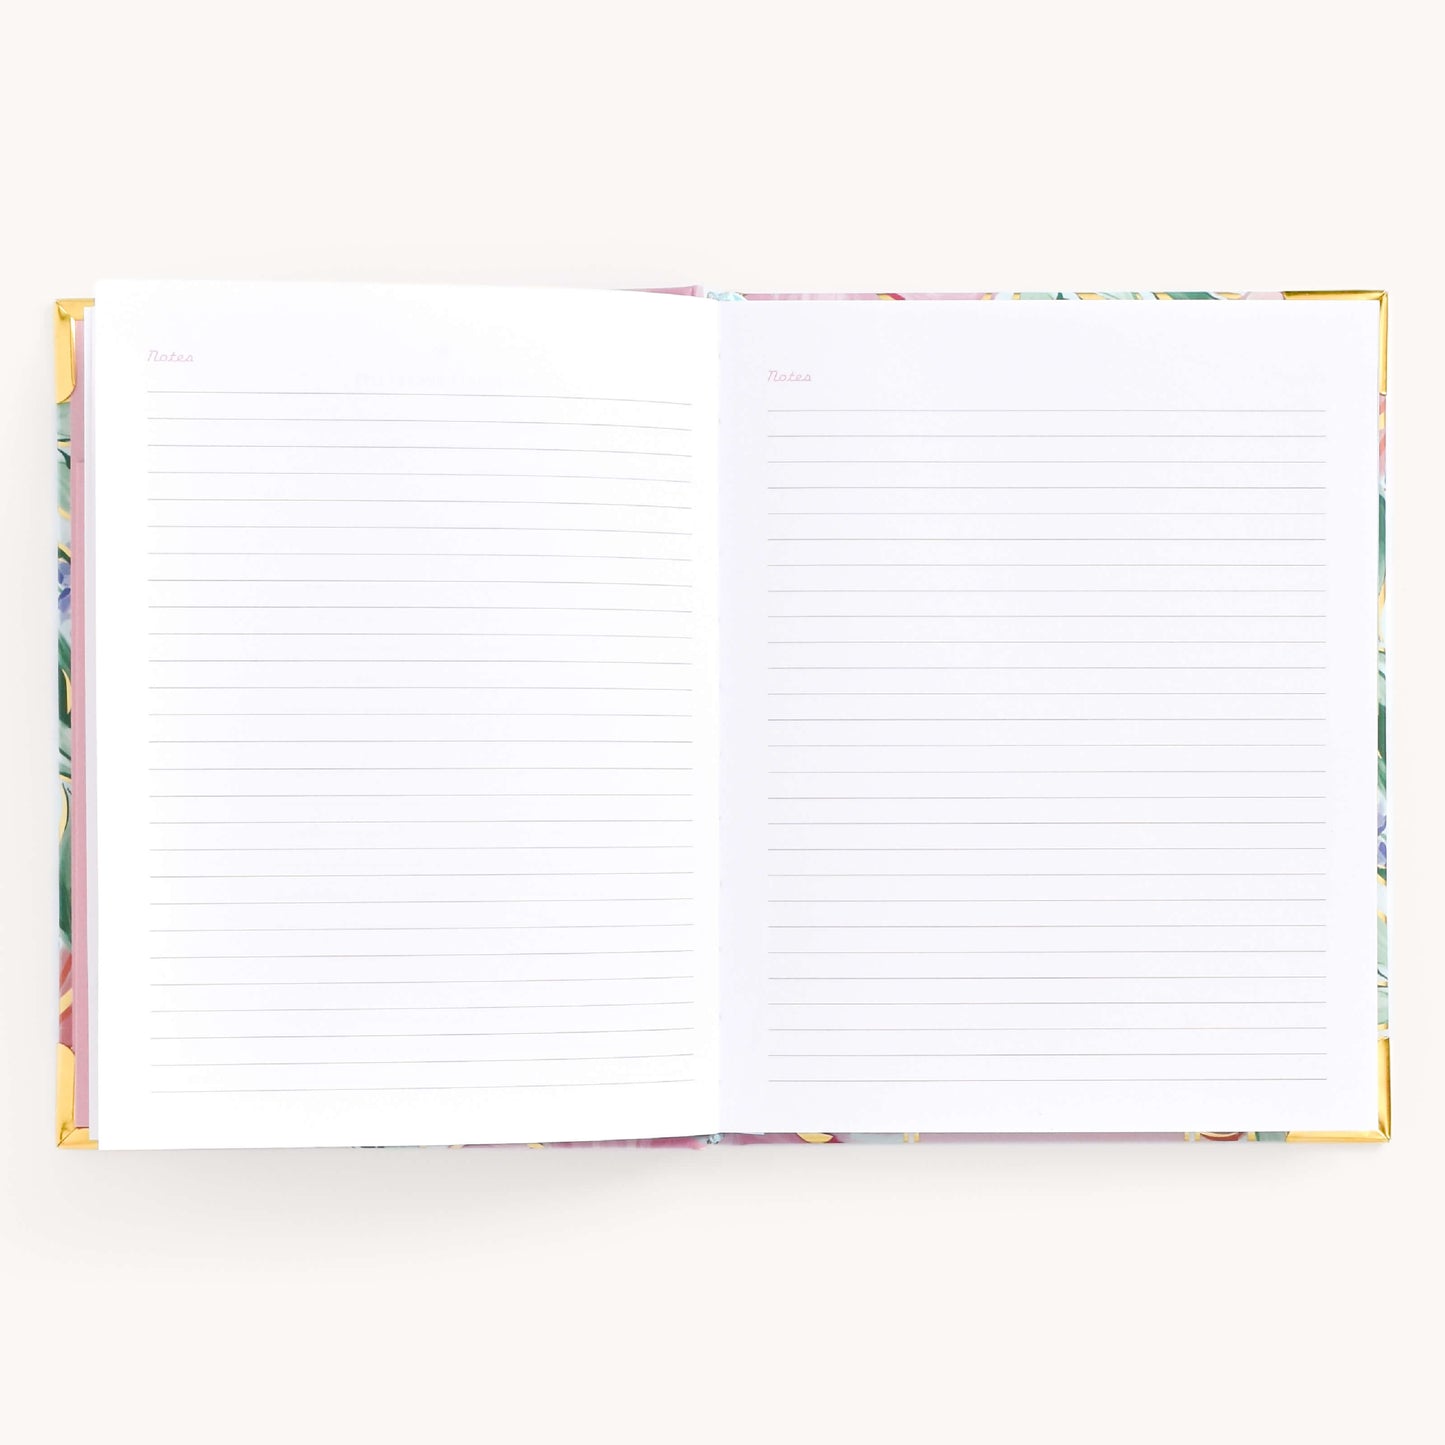 NOTES PAGES